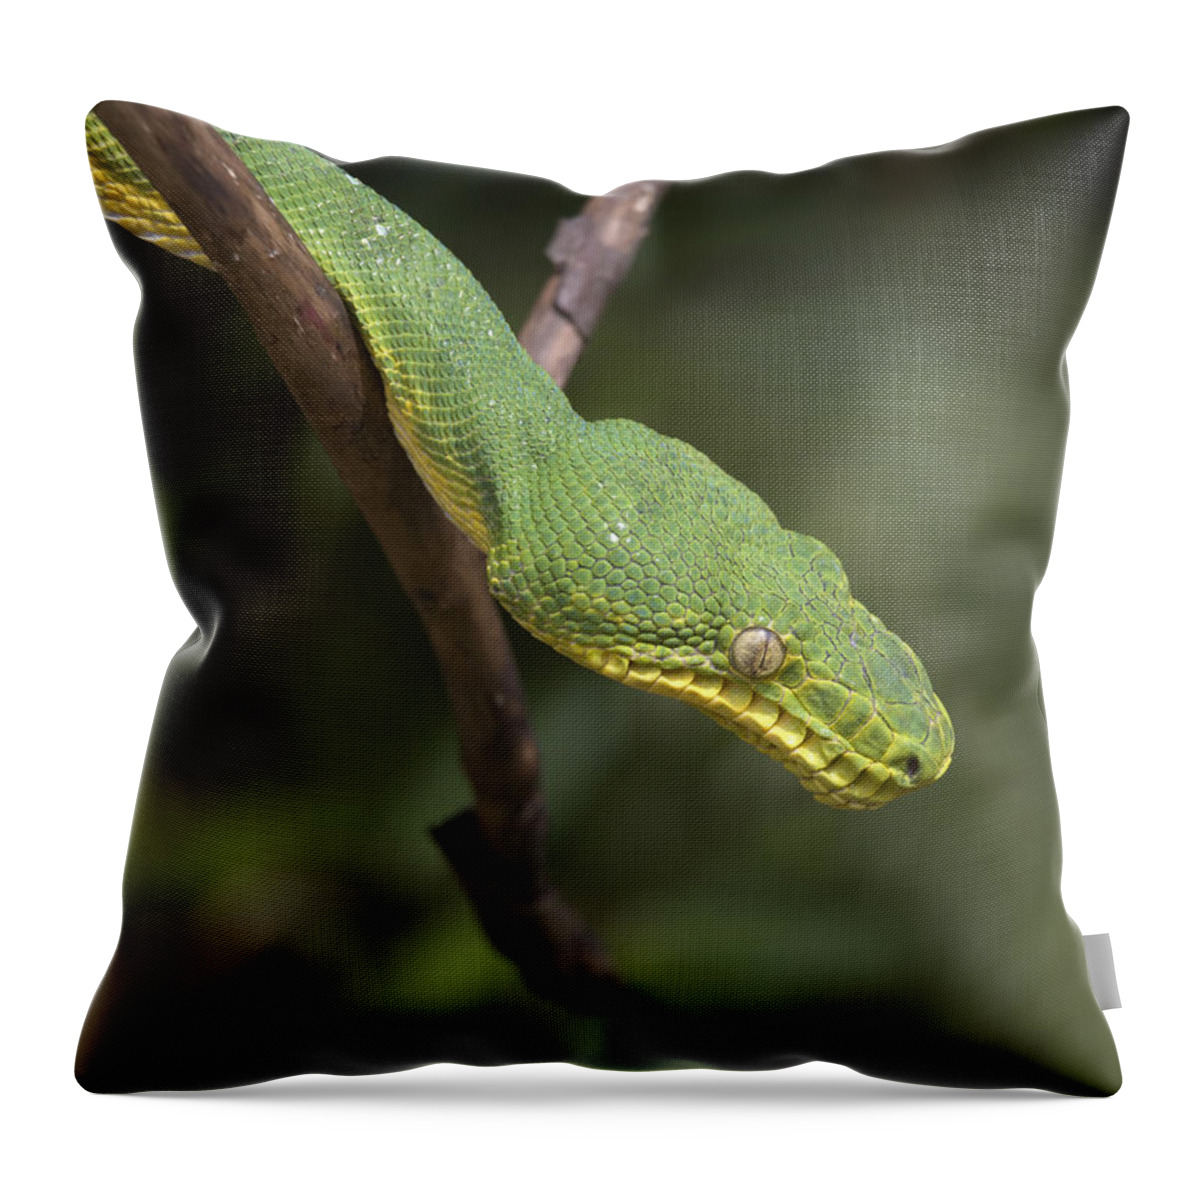 00429548 Throw Pillow featuring the photograph Emerald Tree Boa In Tree Costa Rica #1 by Tim Fitzharris